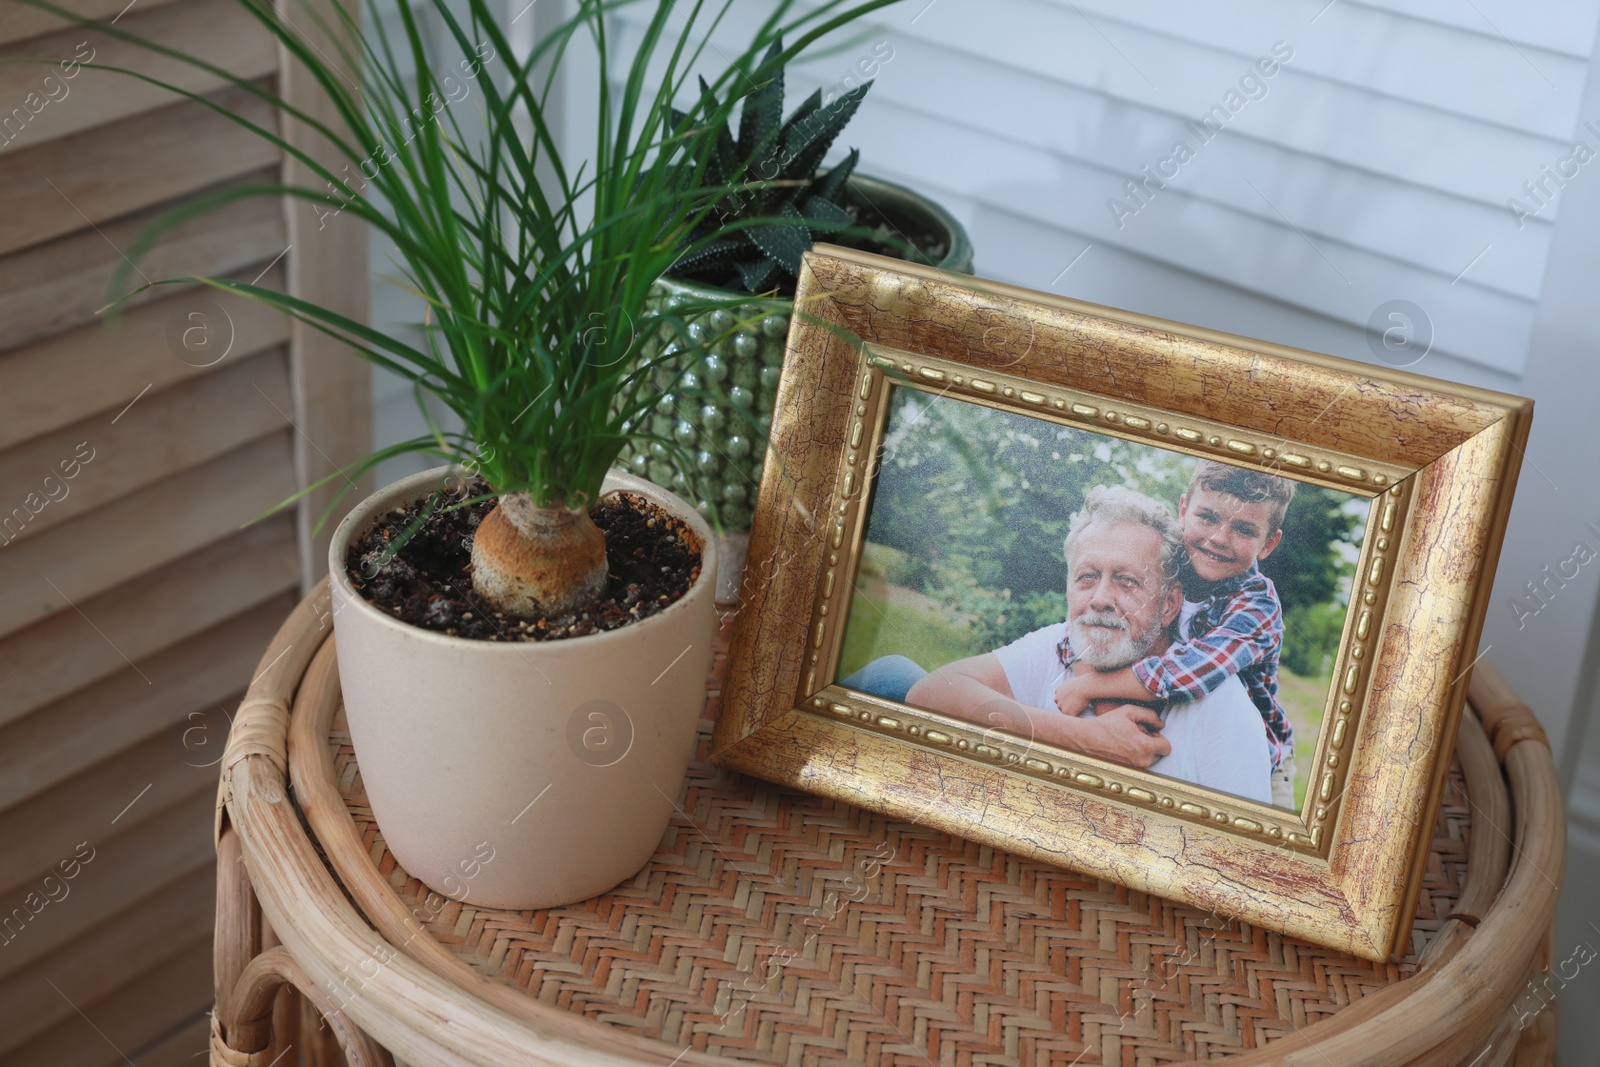 Photo of Framed family photo near houseplants on table in room